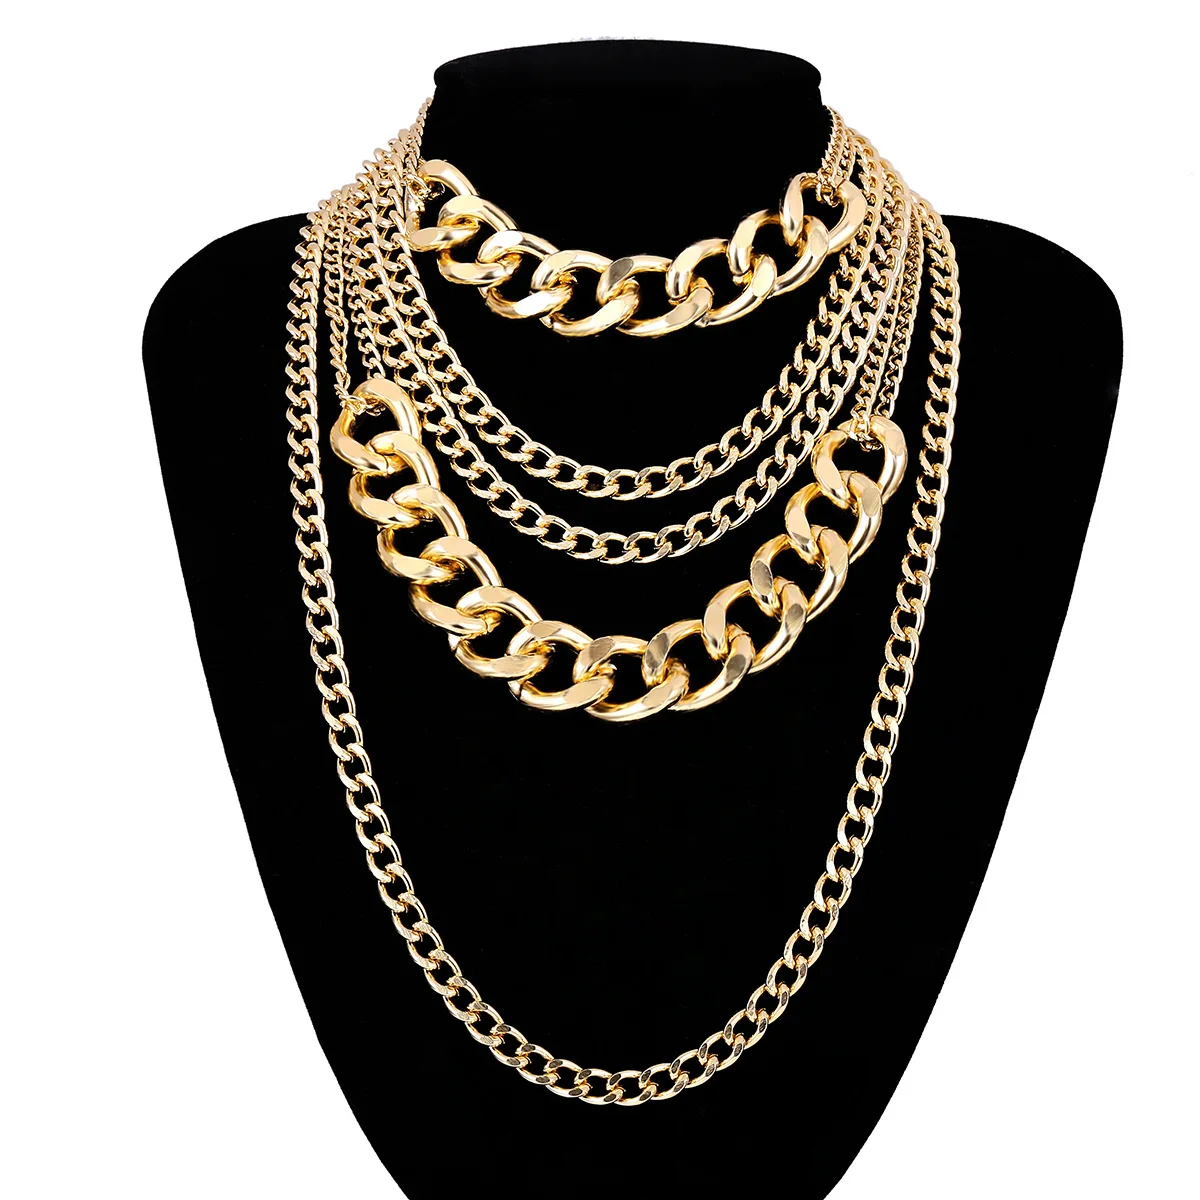 Multilayer Big Thick Gold Color Chain Choker Necklace Goth Hiphop Rock Halloween Grunge Emo Boho Necklaces For Women Men Jewelry